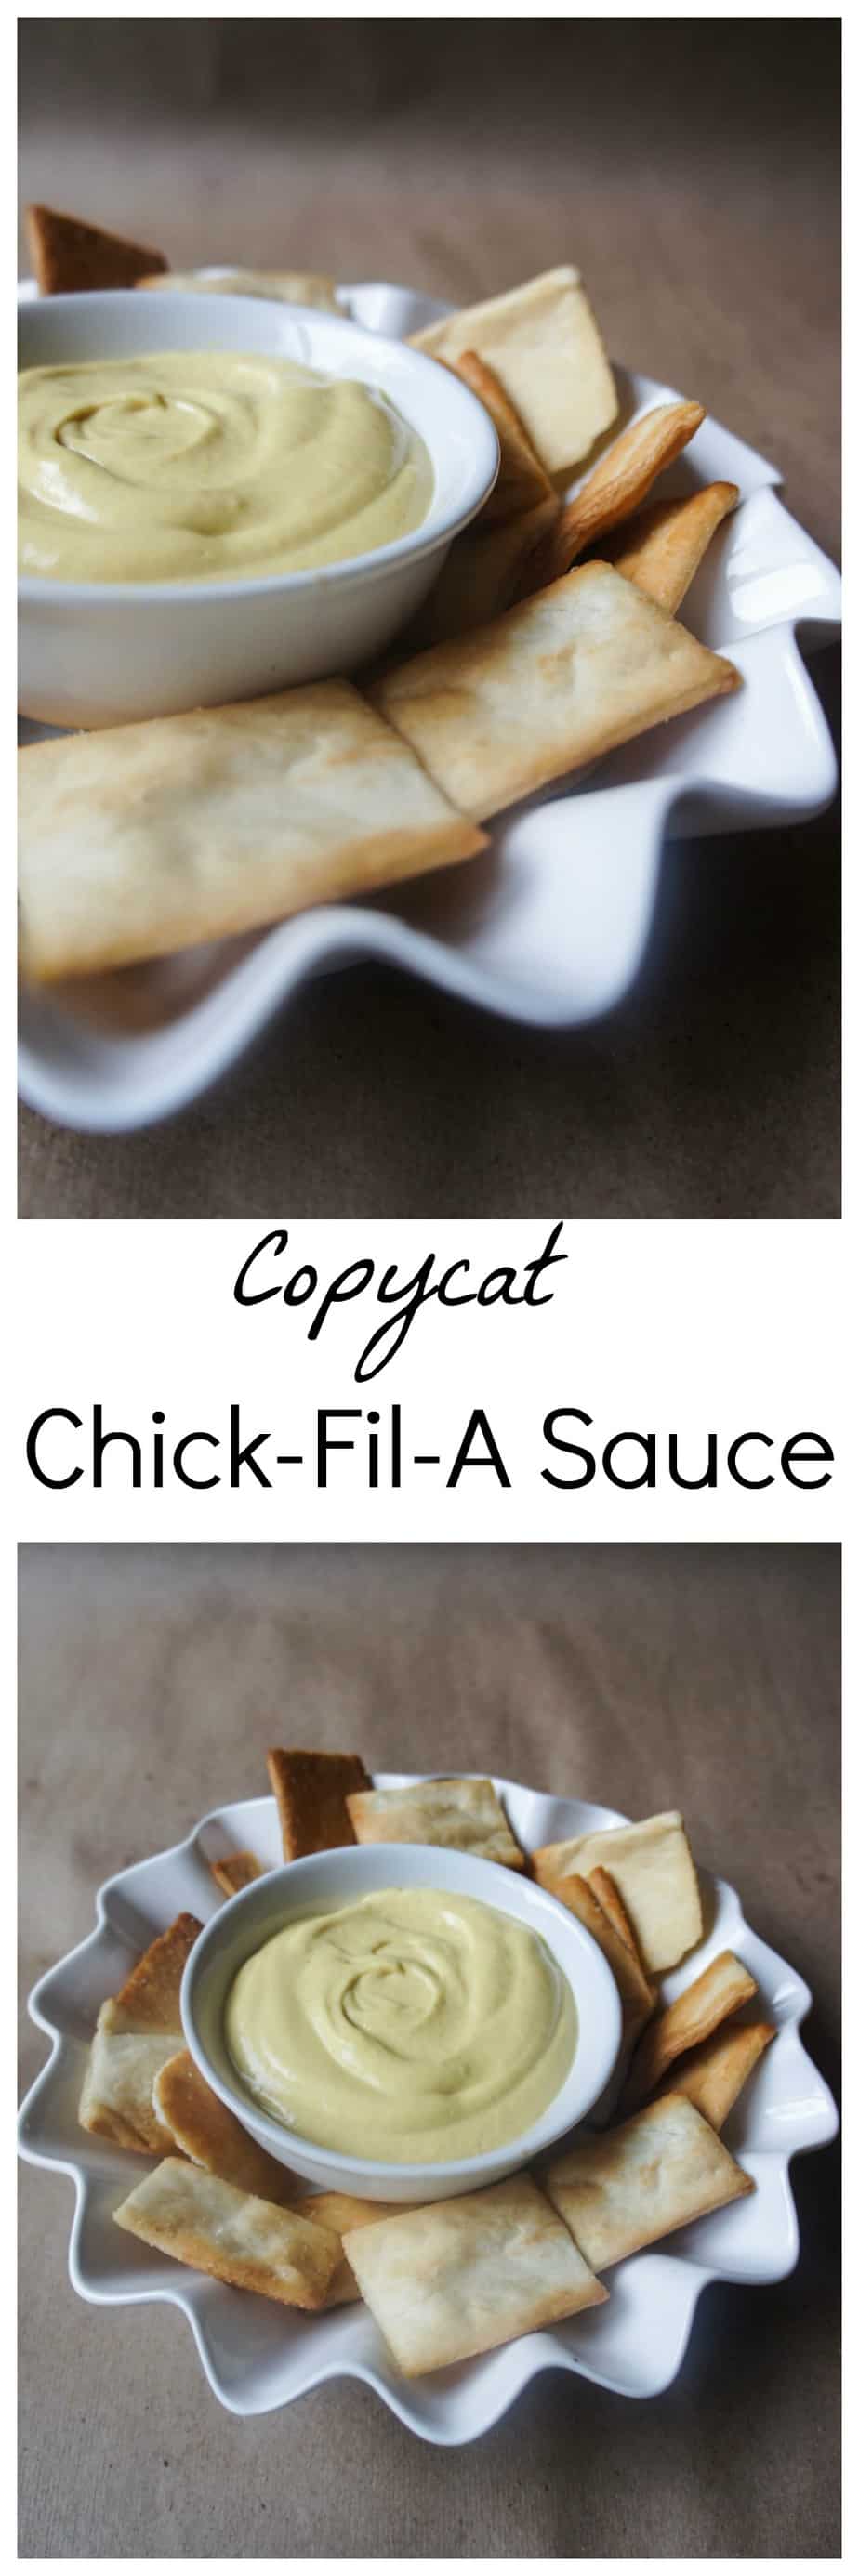 Copycat Chick-Fil-A Sauce is the perfect combo for your pita chips, chicken nuggets, BBQ or to dip veggies in!